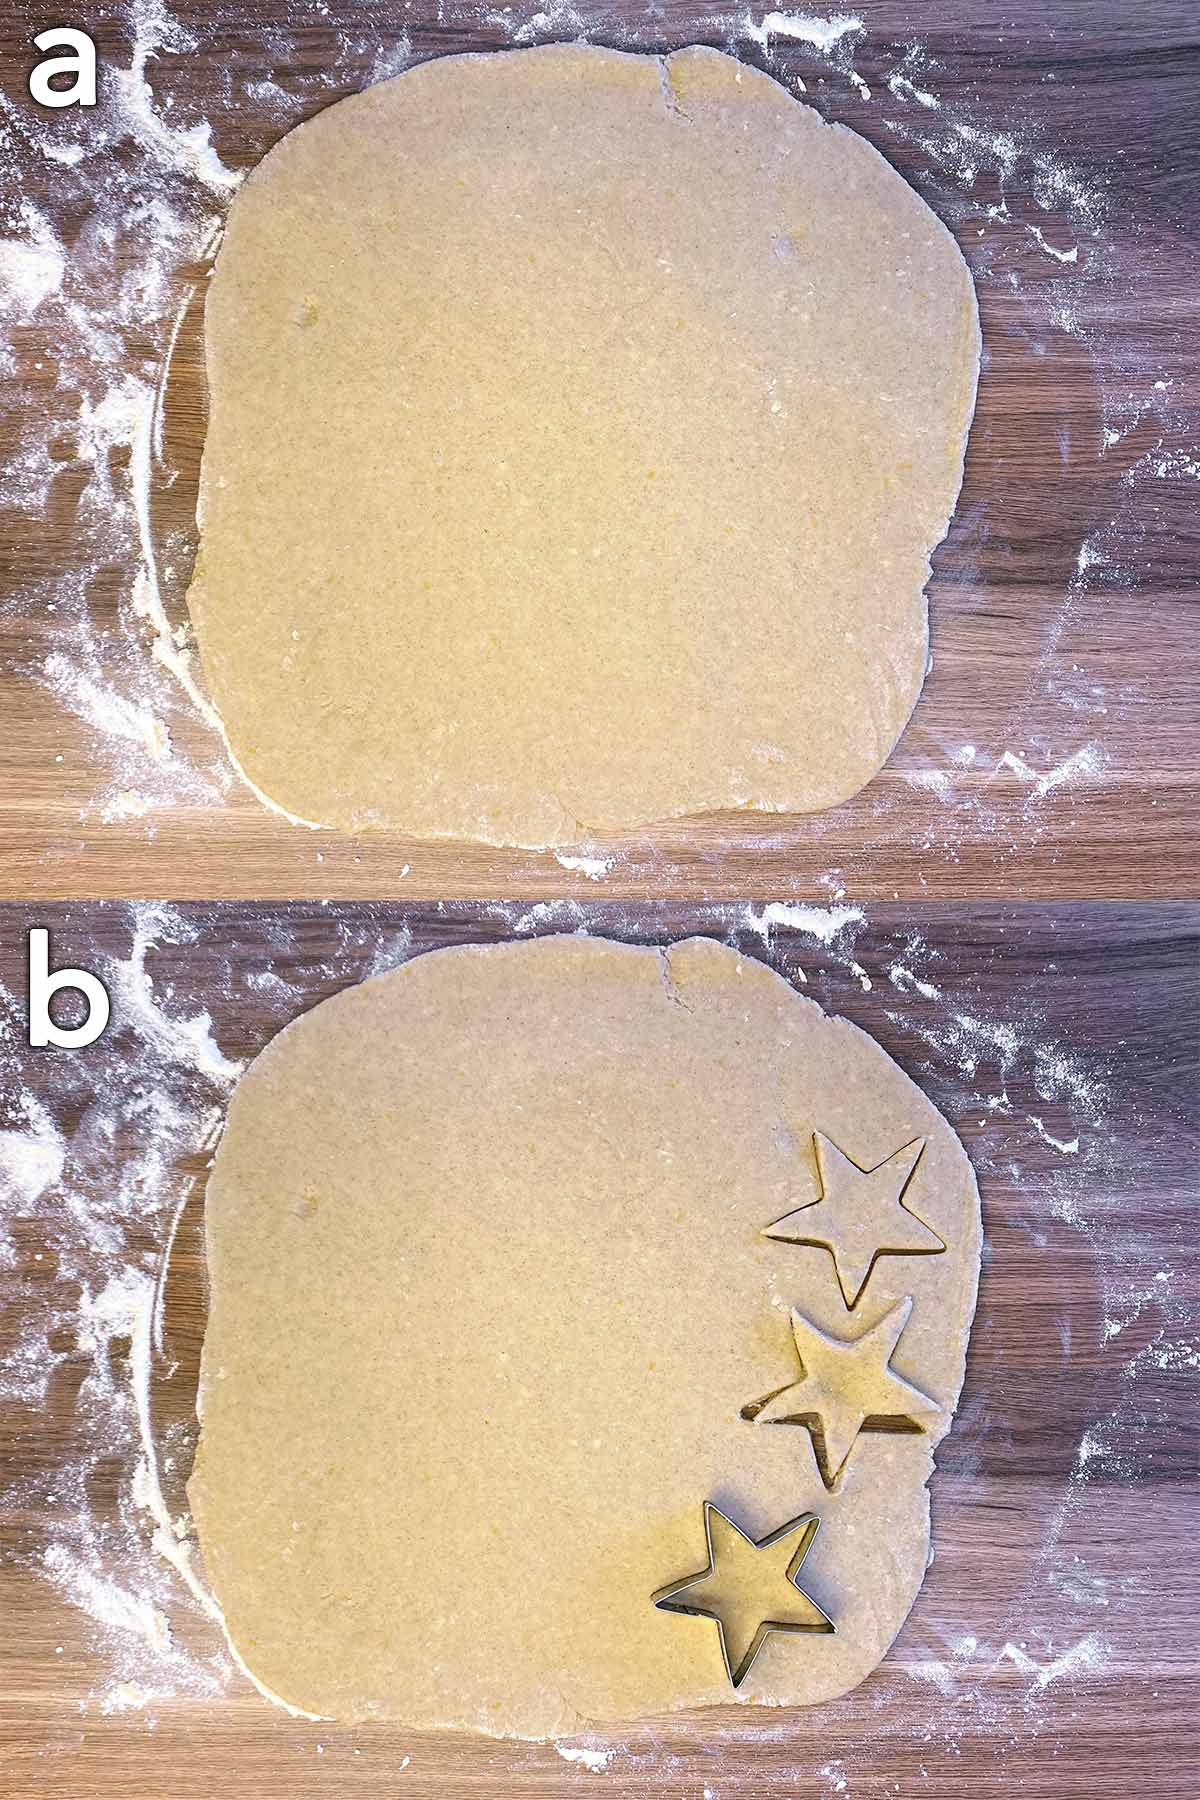 The dough rolled out, then with star shapes cut out.